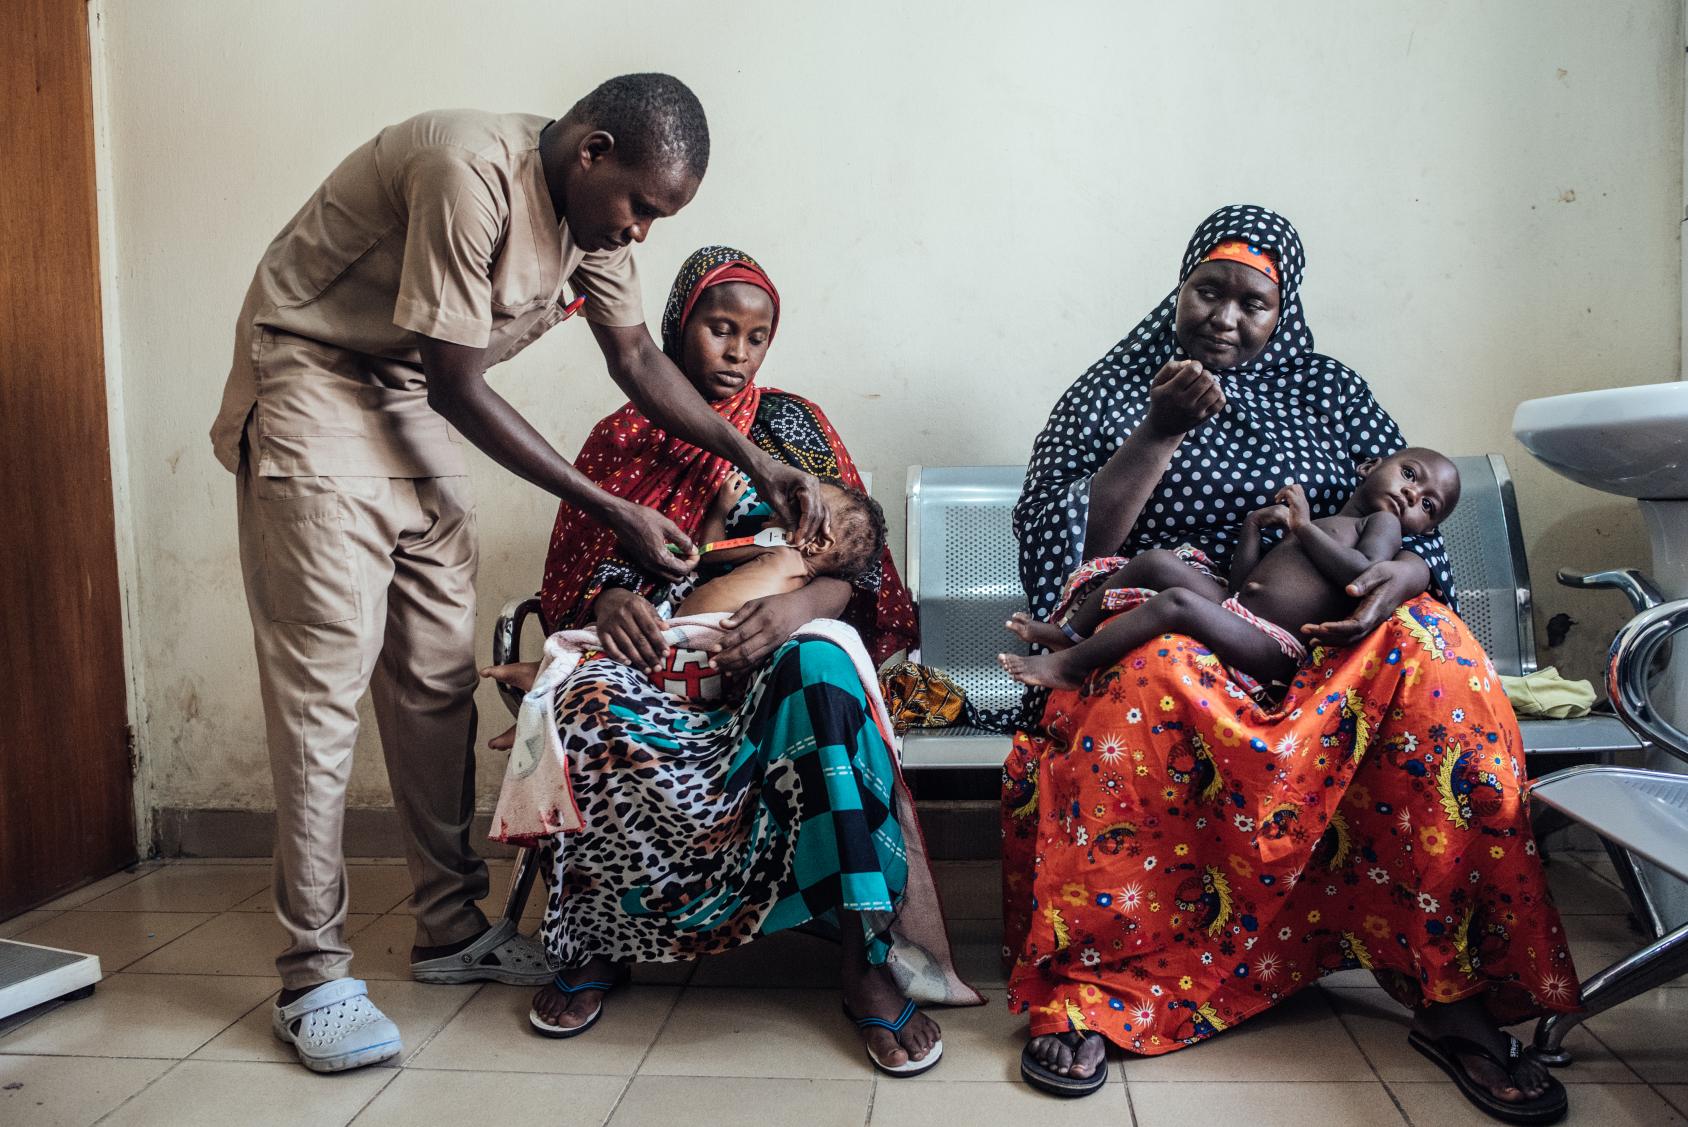 A healthcare professional attends to a malnourished child being held by their mother, while another woman sits next to them holding her child in a waiting room. 